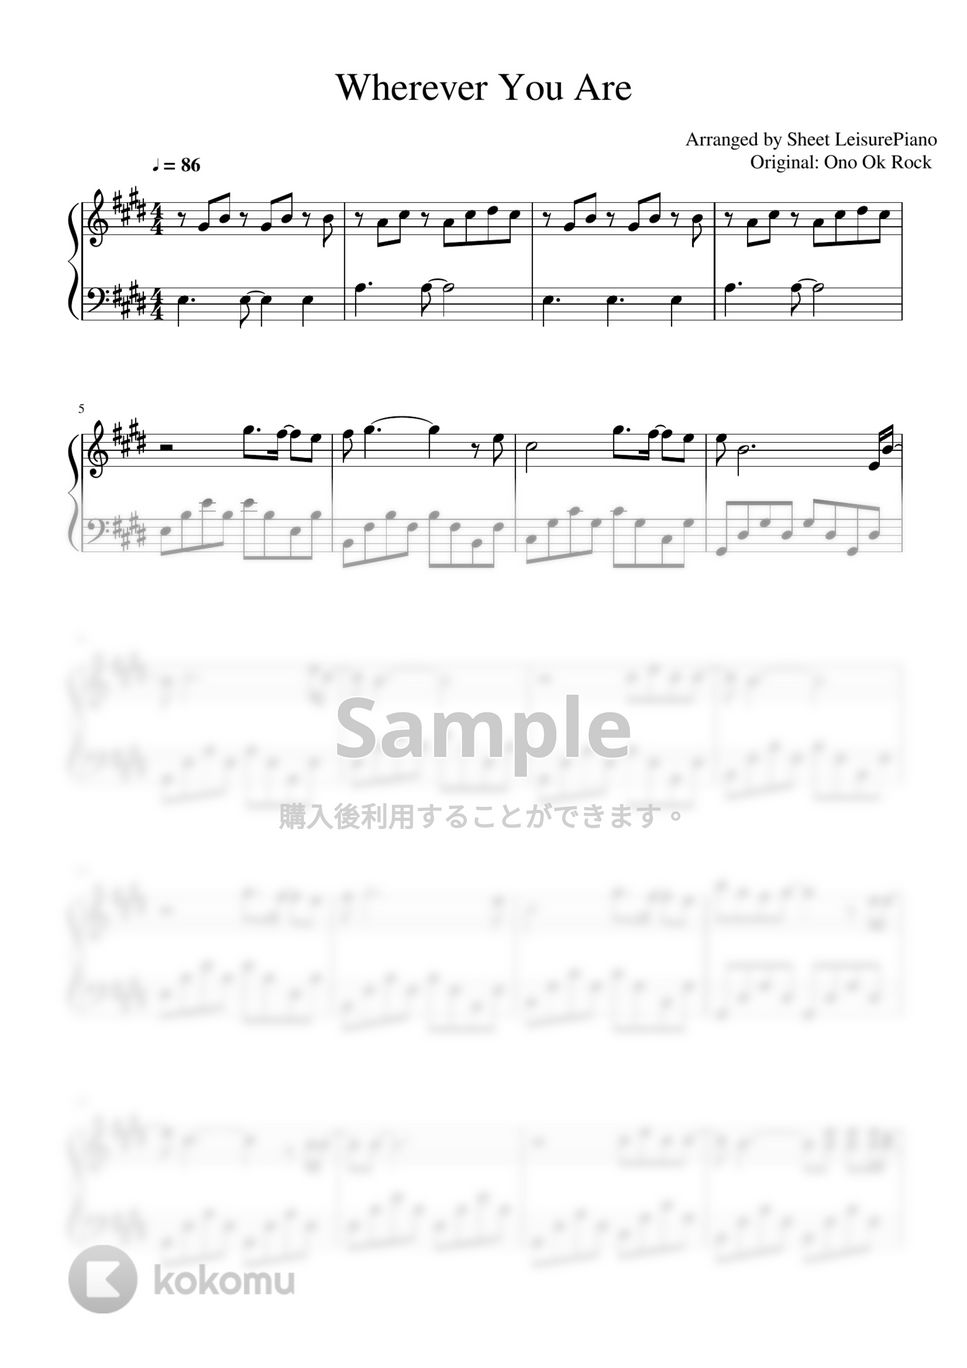 ONE OK ROCK - Wherever You Are by Leisure (OOR Piano) Sheets